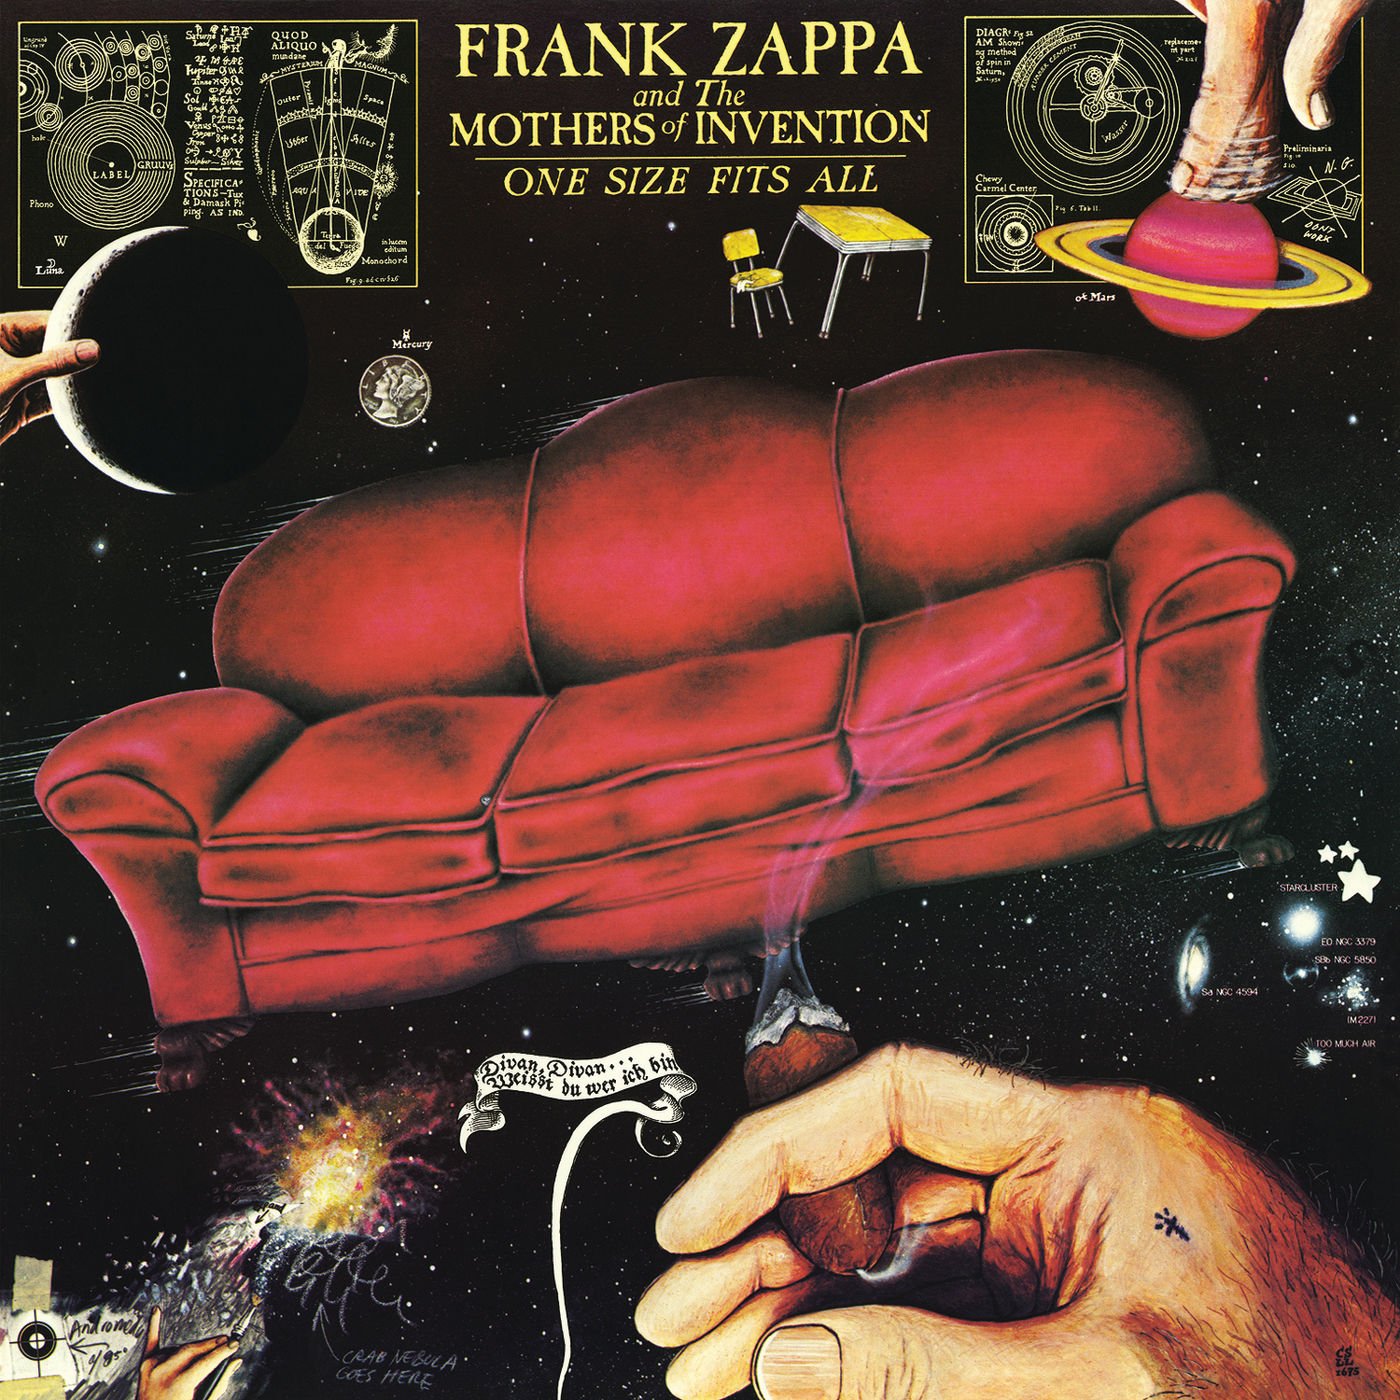 Frank Zappa and The Mothers Of Invention-One Size Fits All-24-192-WEB-FLAC-REMASTERED-2021-OBZEN Download